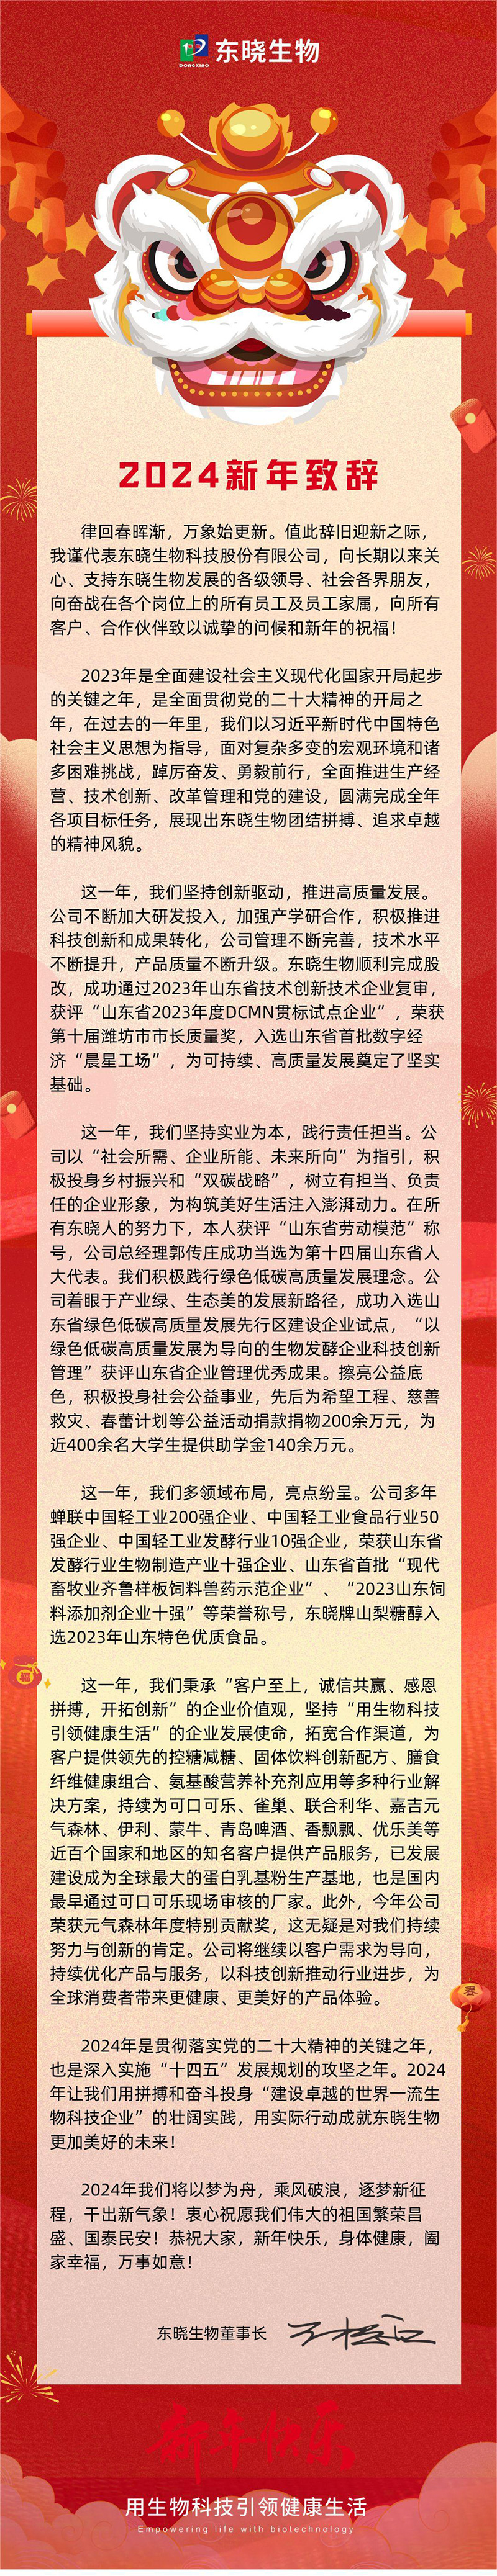 New Year's message from Chairman of Dongxiao Biology for 2004